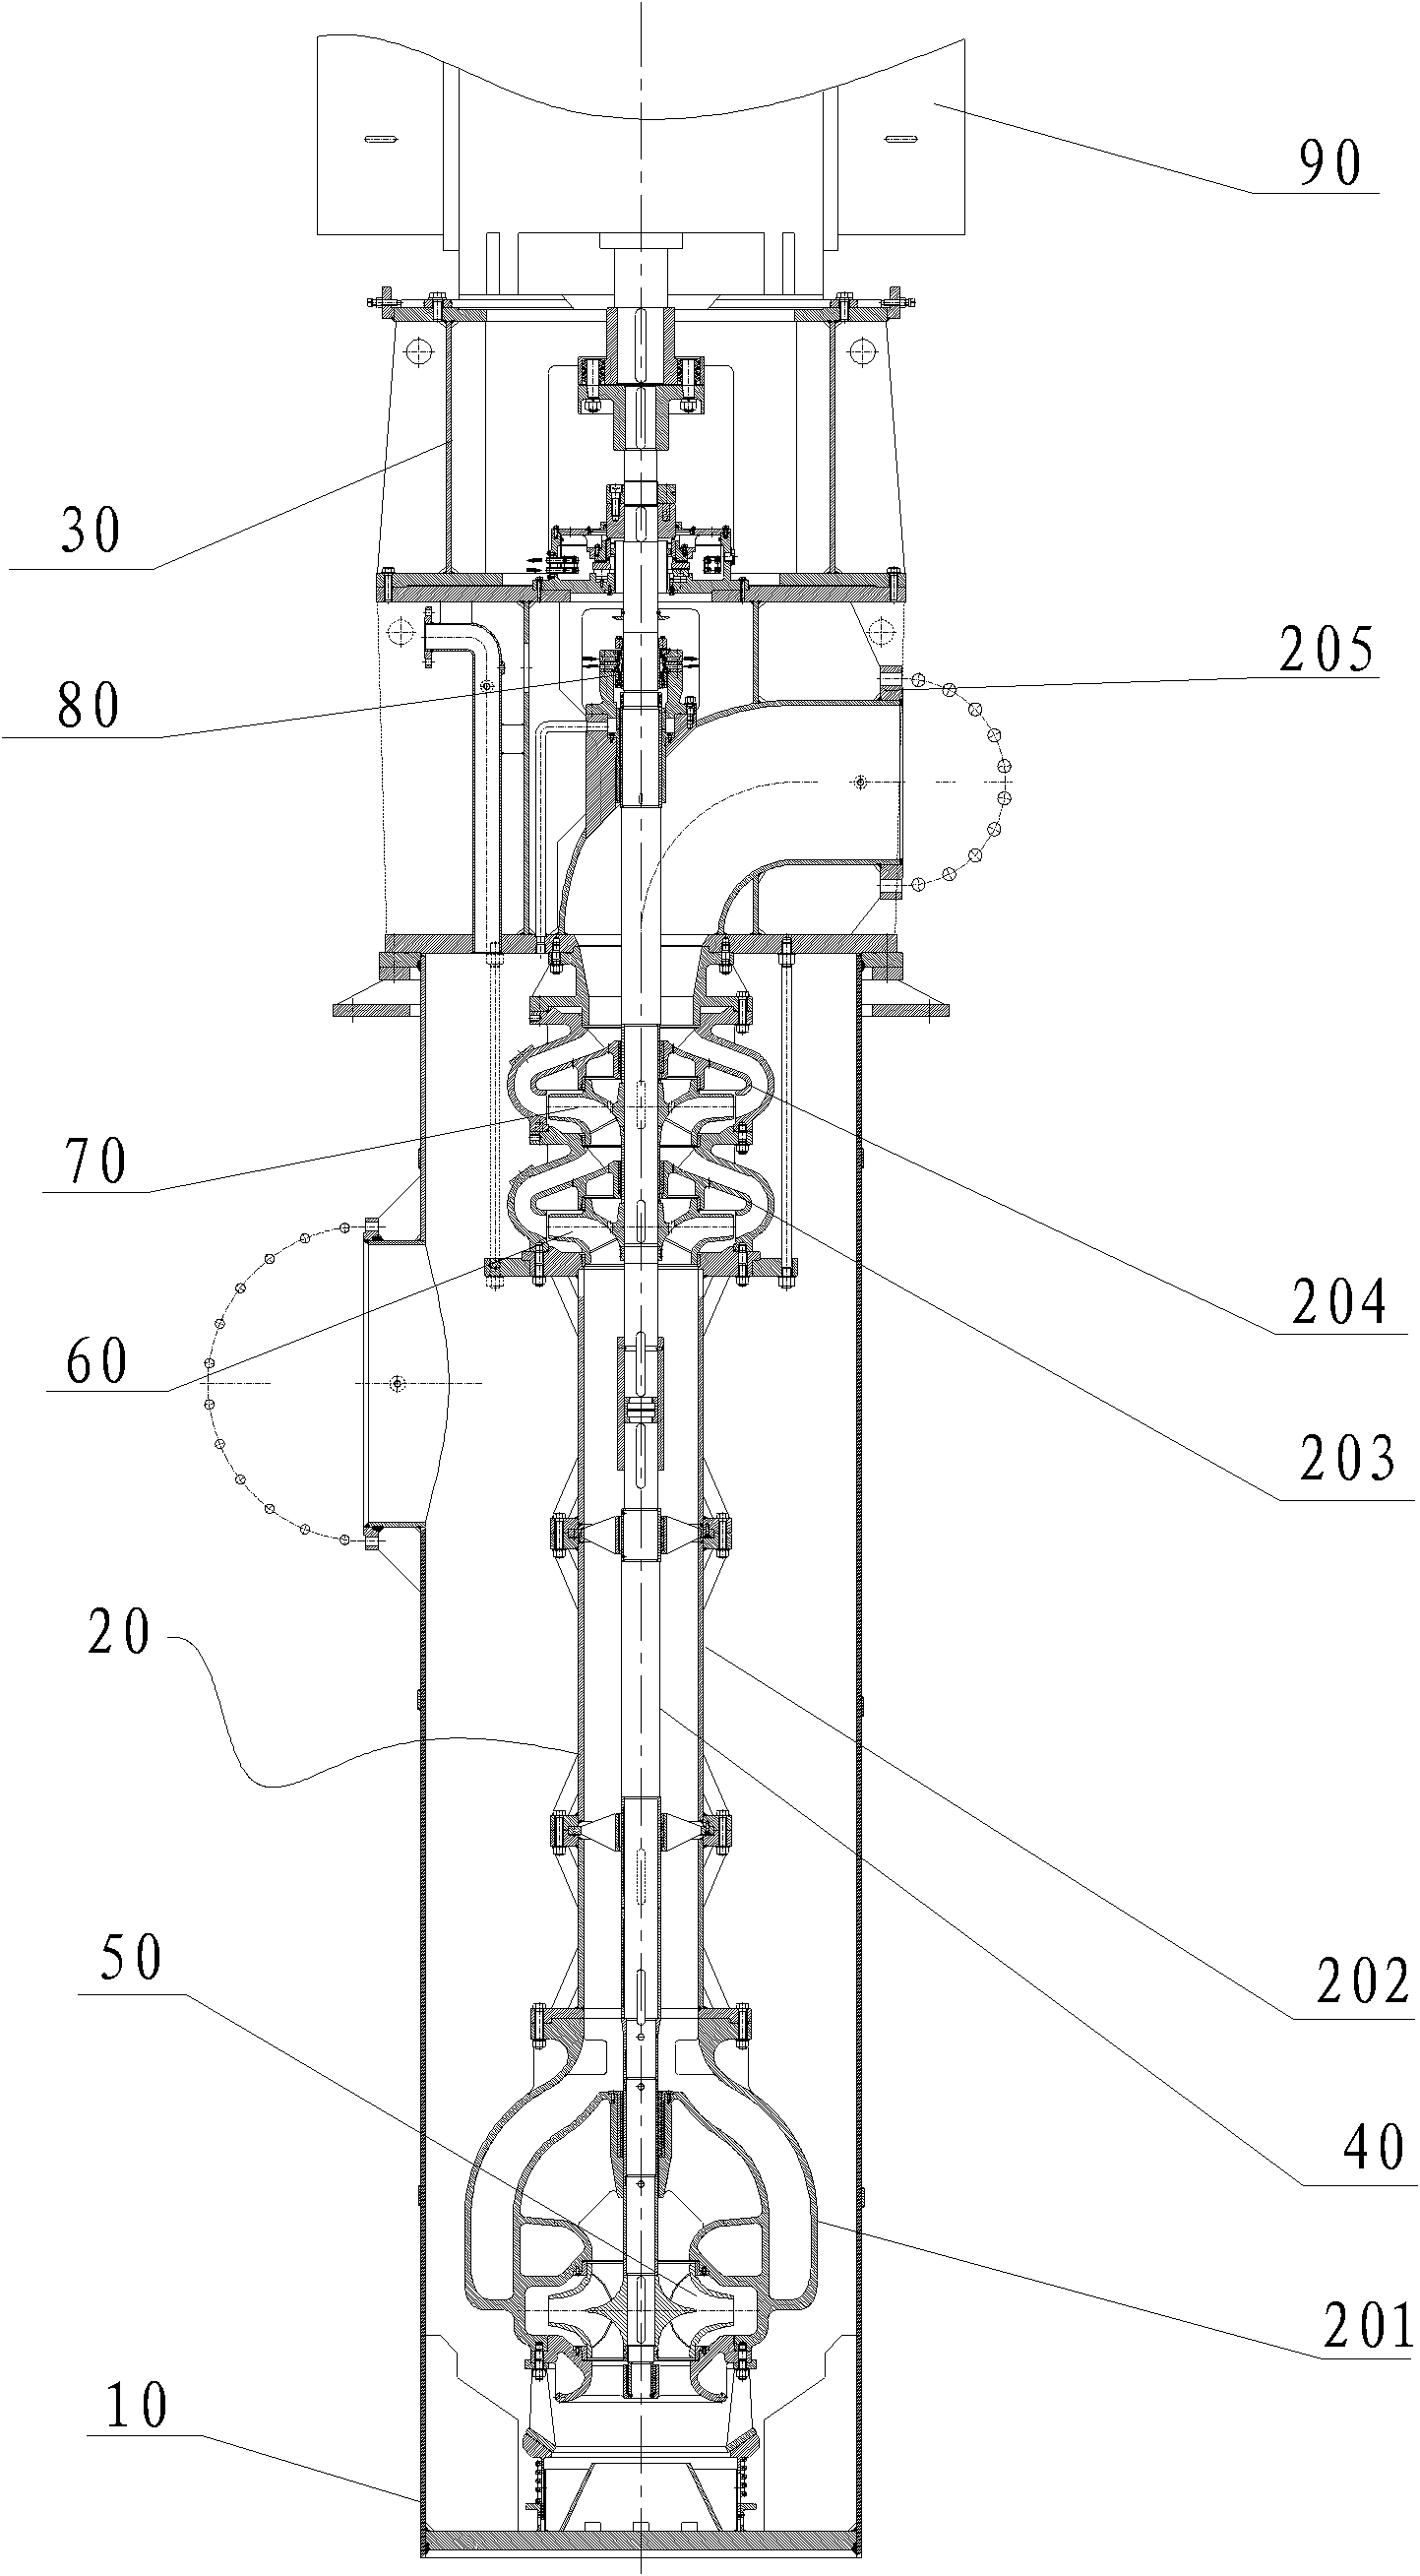 Top-level impeller on condensate extraction pump for nuclear power station